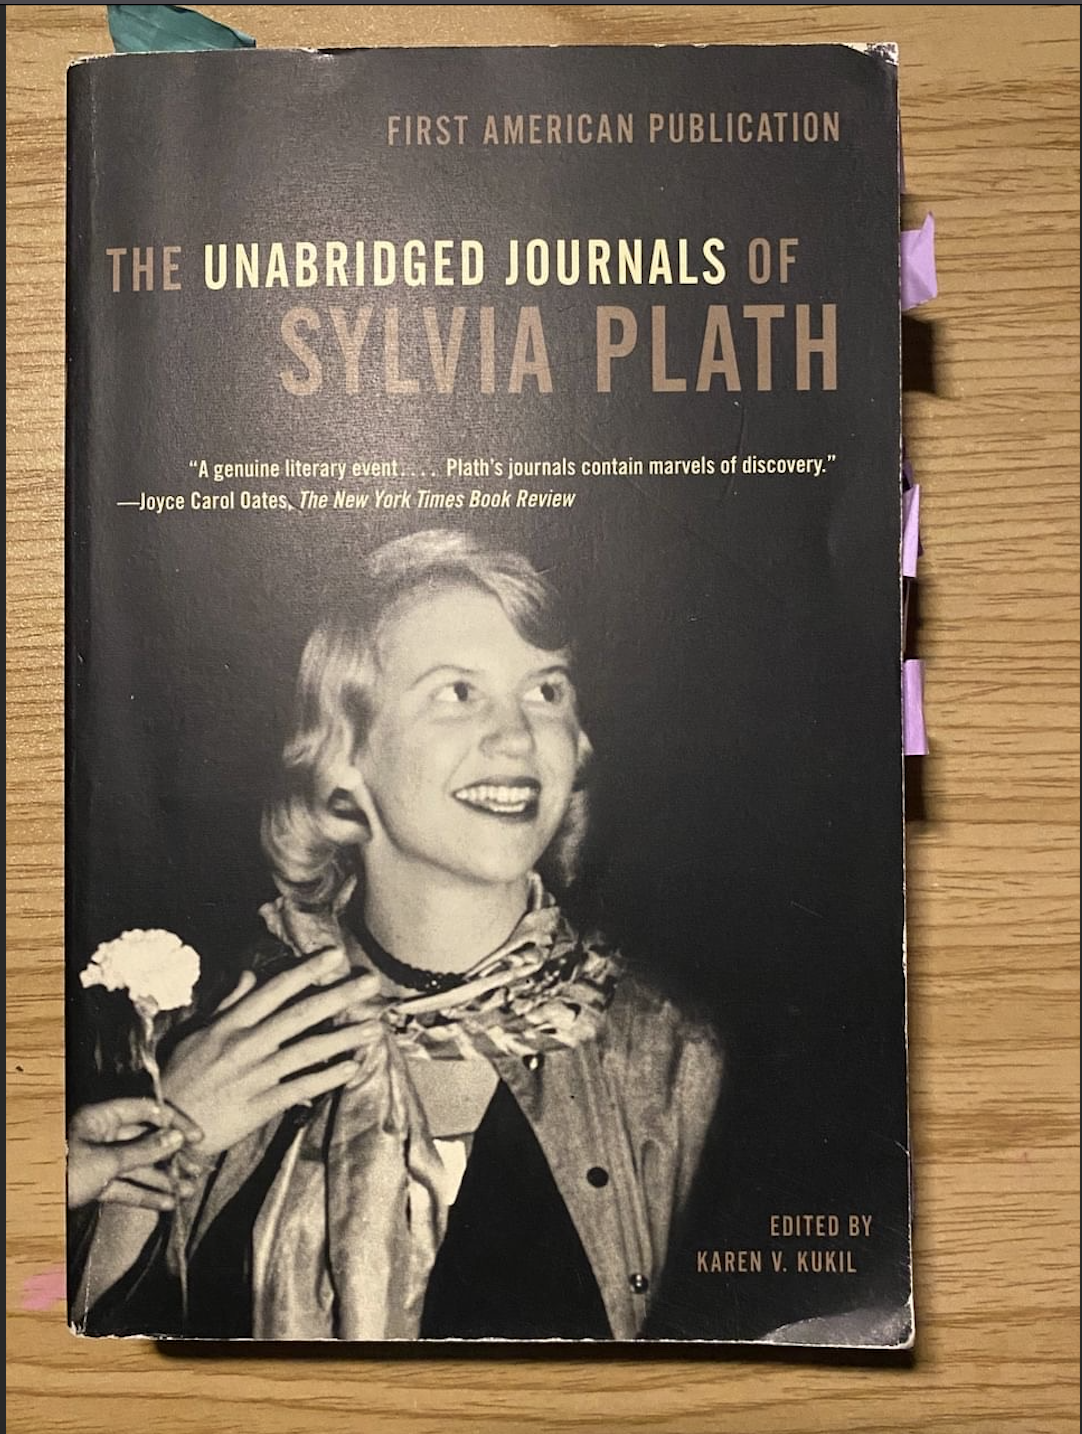 A copy of The Journals of Sylvia Plath